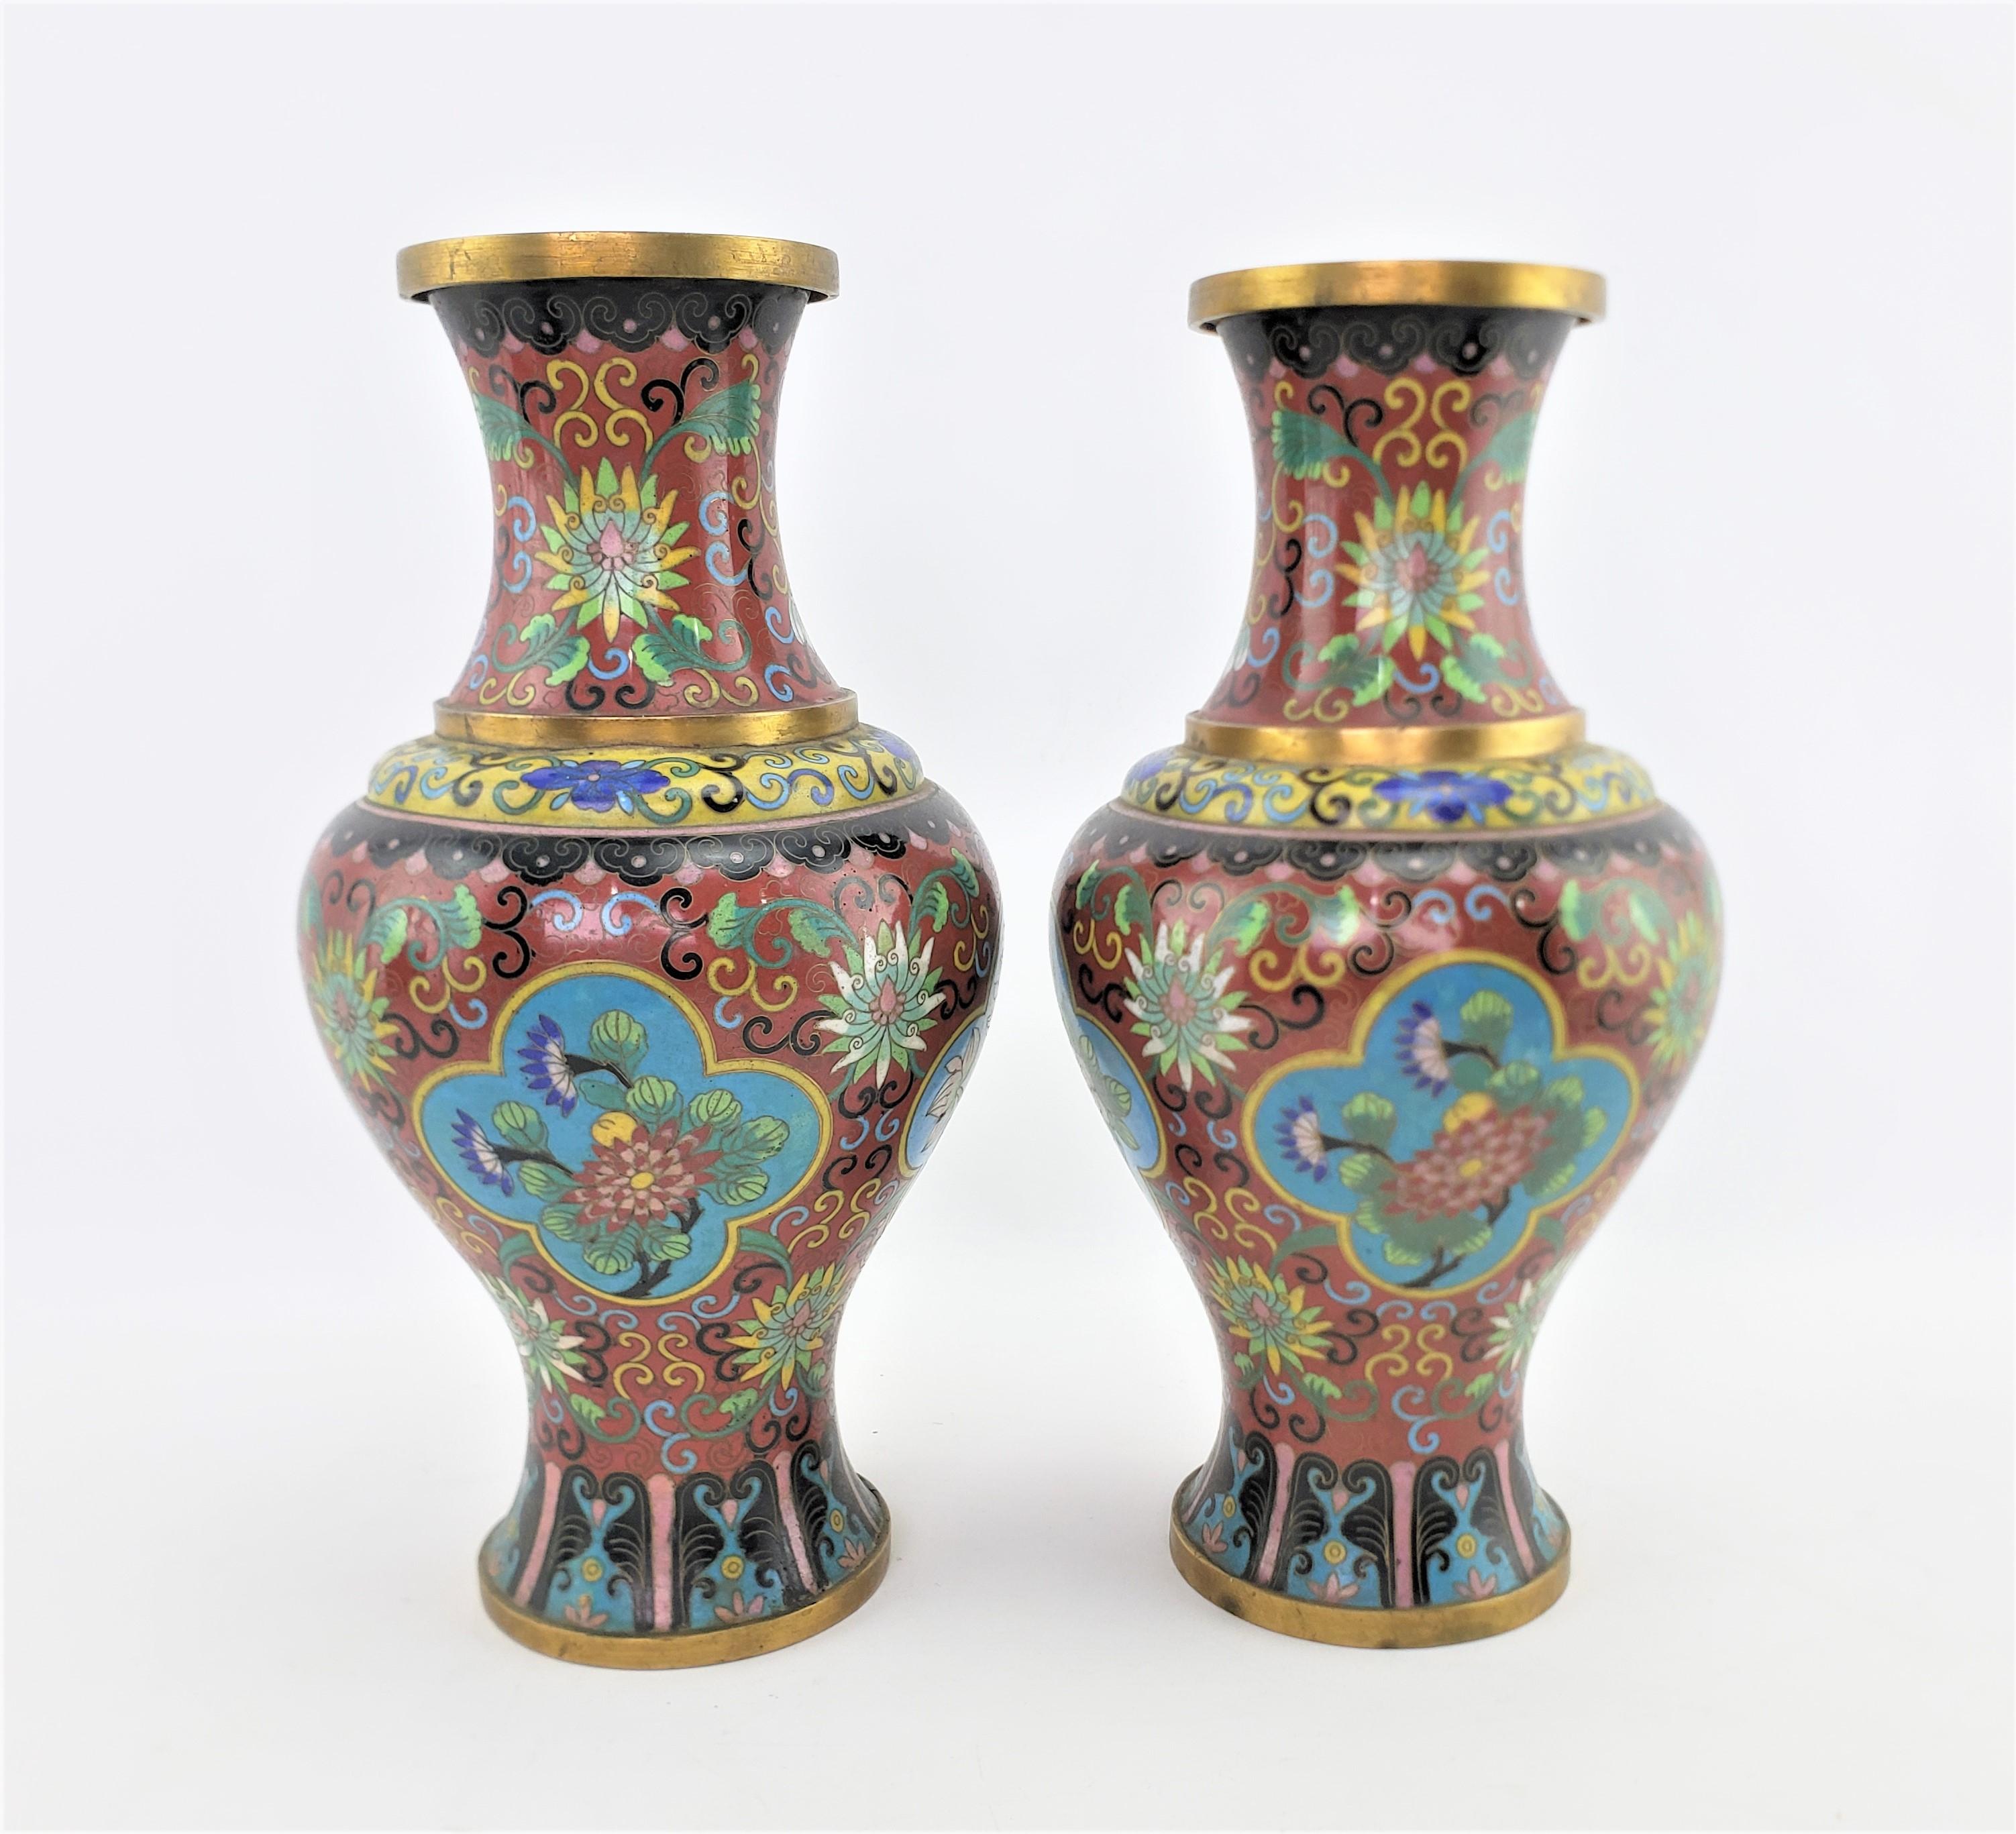 Hand-Crafted Pair of Early Chinese Republic Era Cloisonne Vases with Stylized Floral Motif For Sale